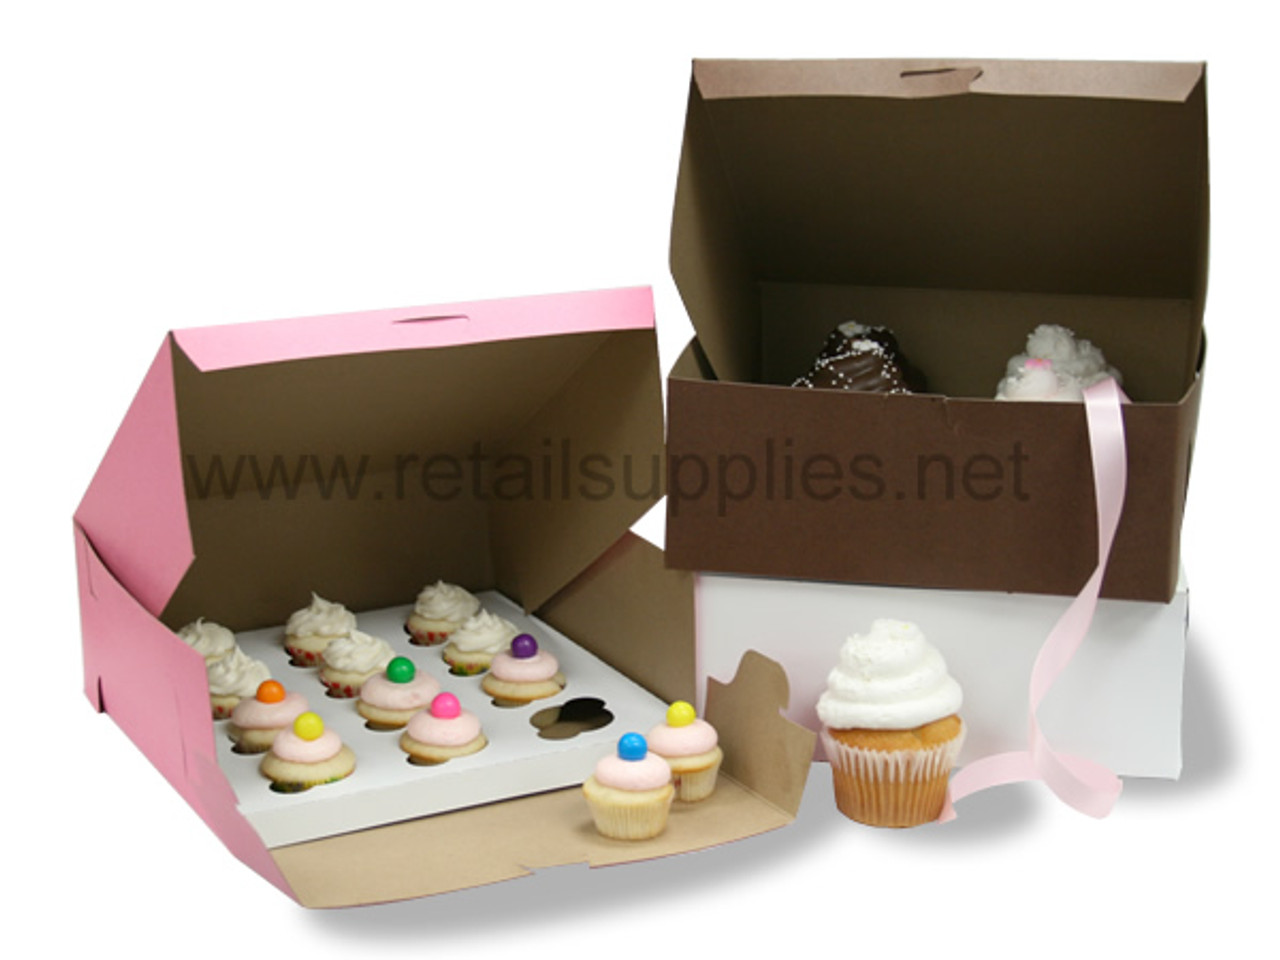 10" x 10" x 4" Pink Cupcake Bakery Box to fit 6 Regular Cup/12 Mini Cup Size per 100